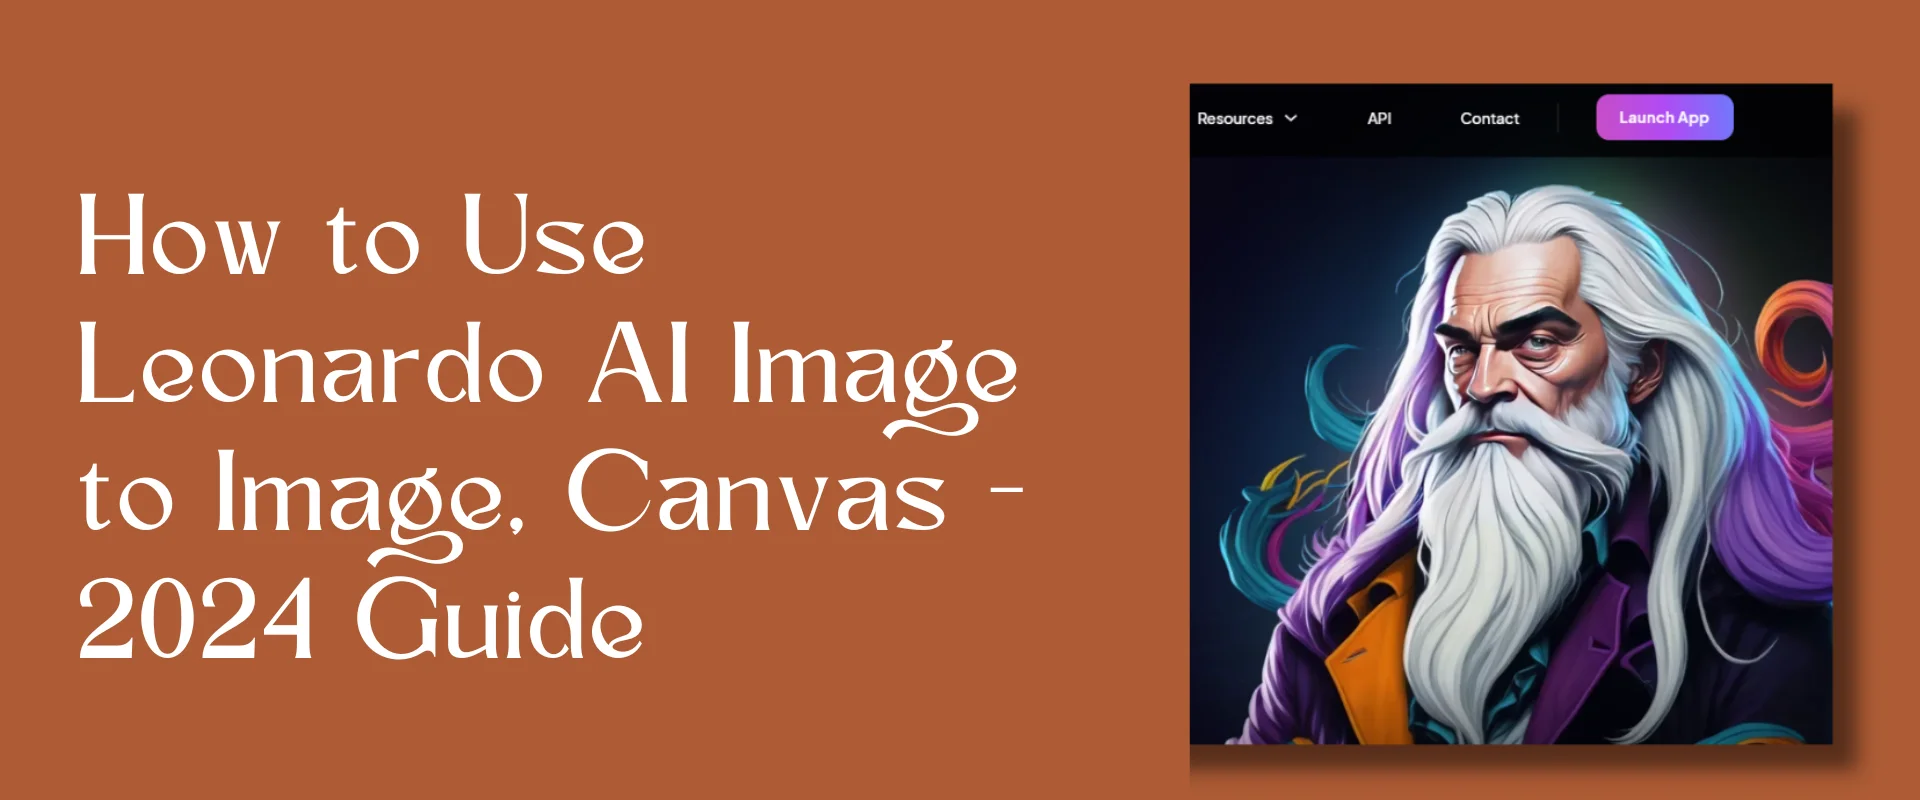 How to Use Leonardo AI Image to Image, Canvas Feature in 2024